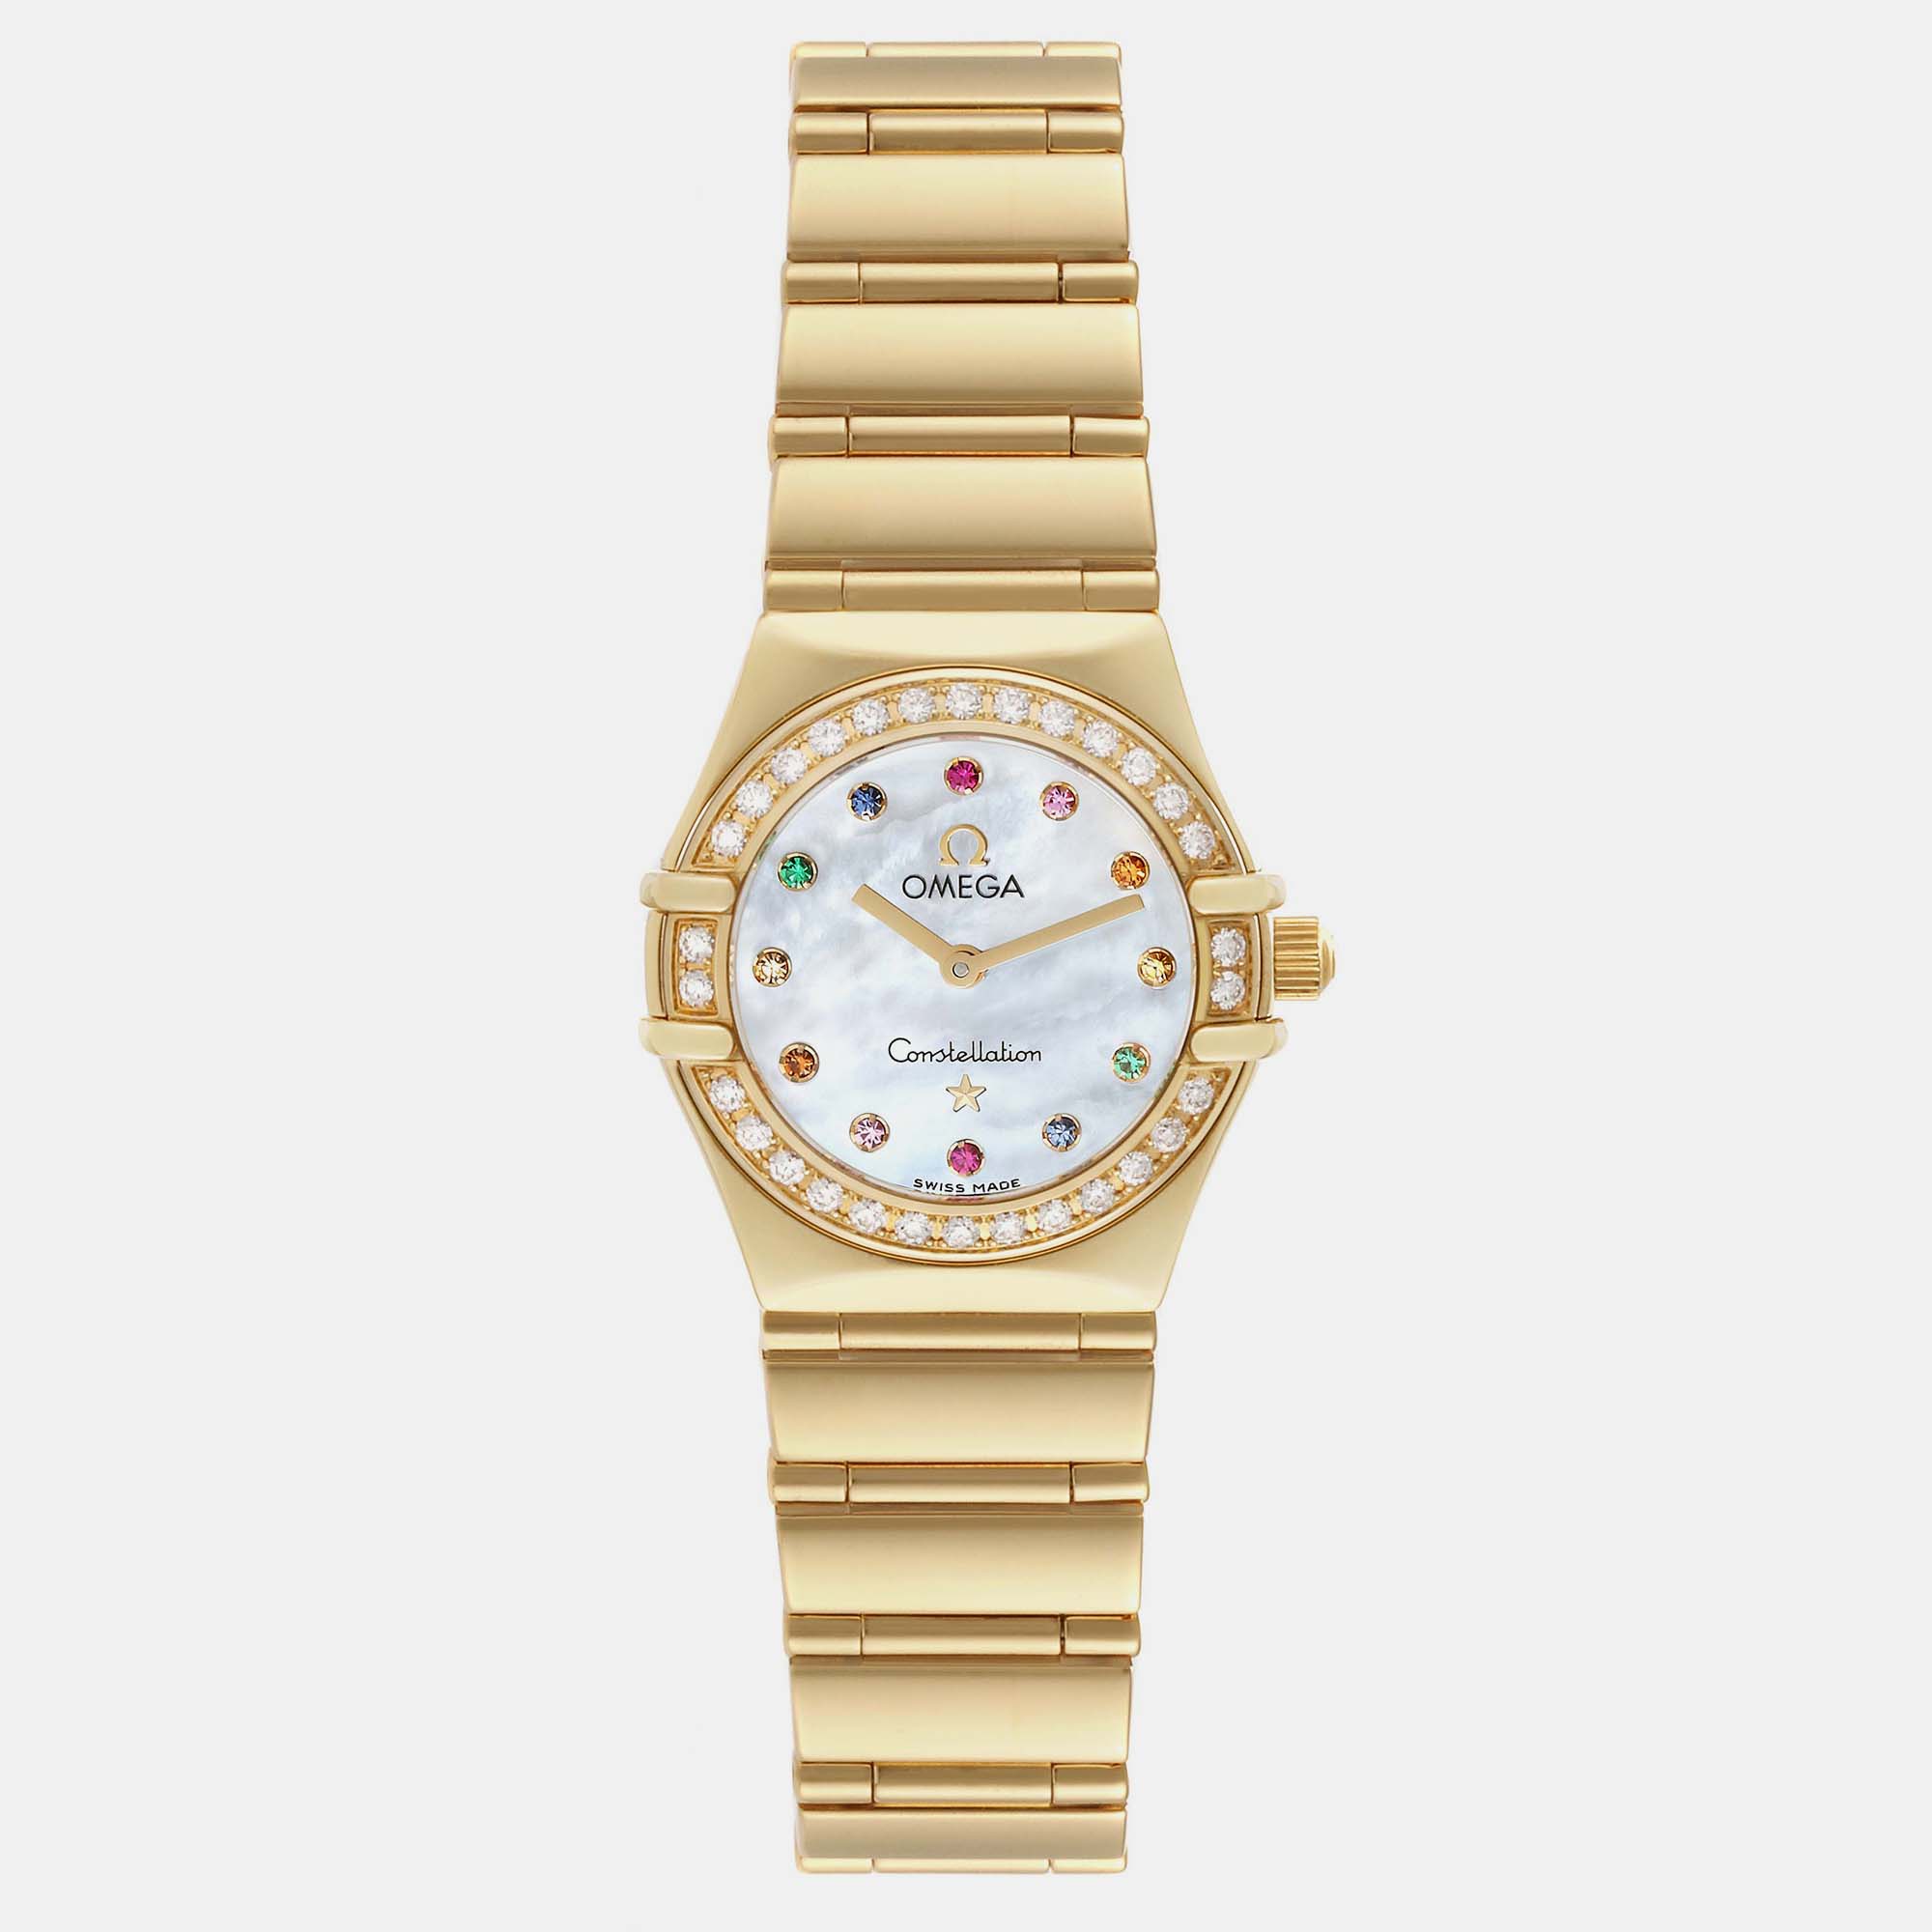 Omega mother of pearl diamond constellation 1164.79.00 automatic women's wristwatch 22.5 mm